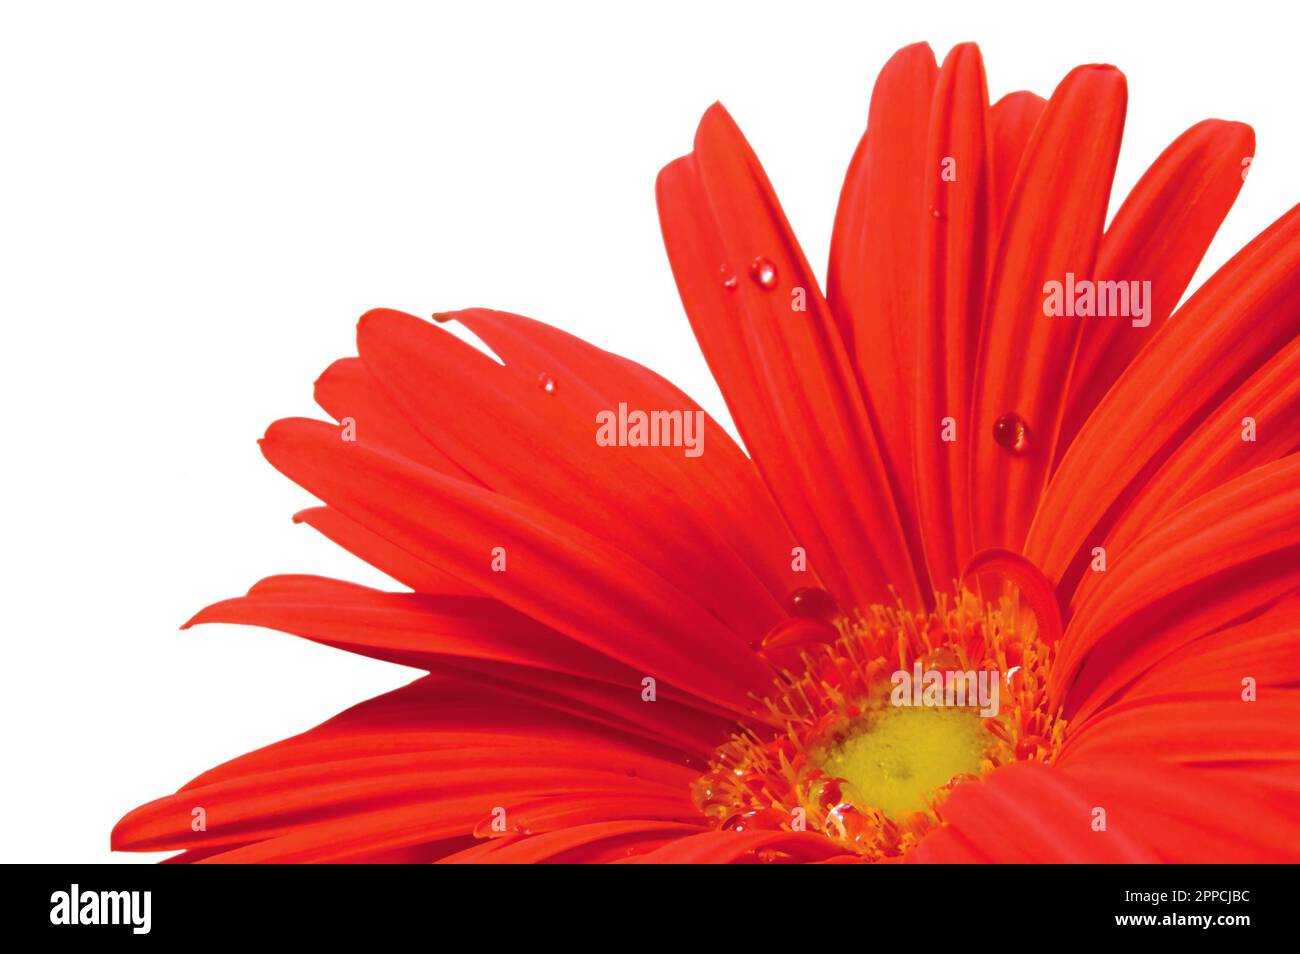 Red gerbera daisy flower in full bloom, blooming head petals perspective view, large detailed isolated horizontal macro closeup, dew drops detail Stock Photo